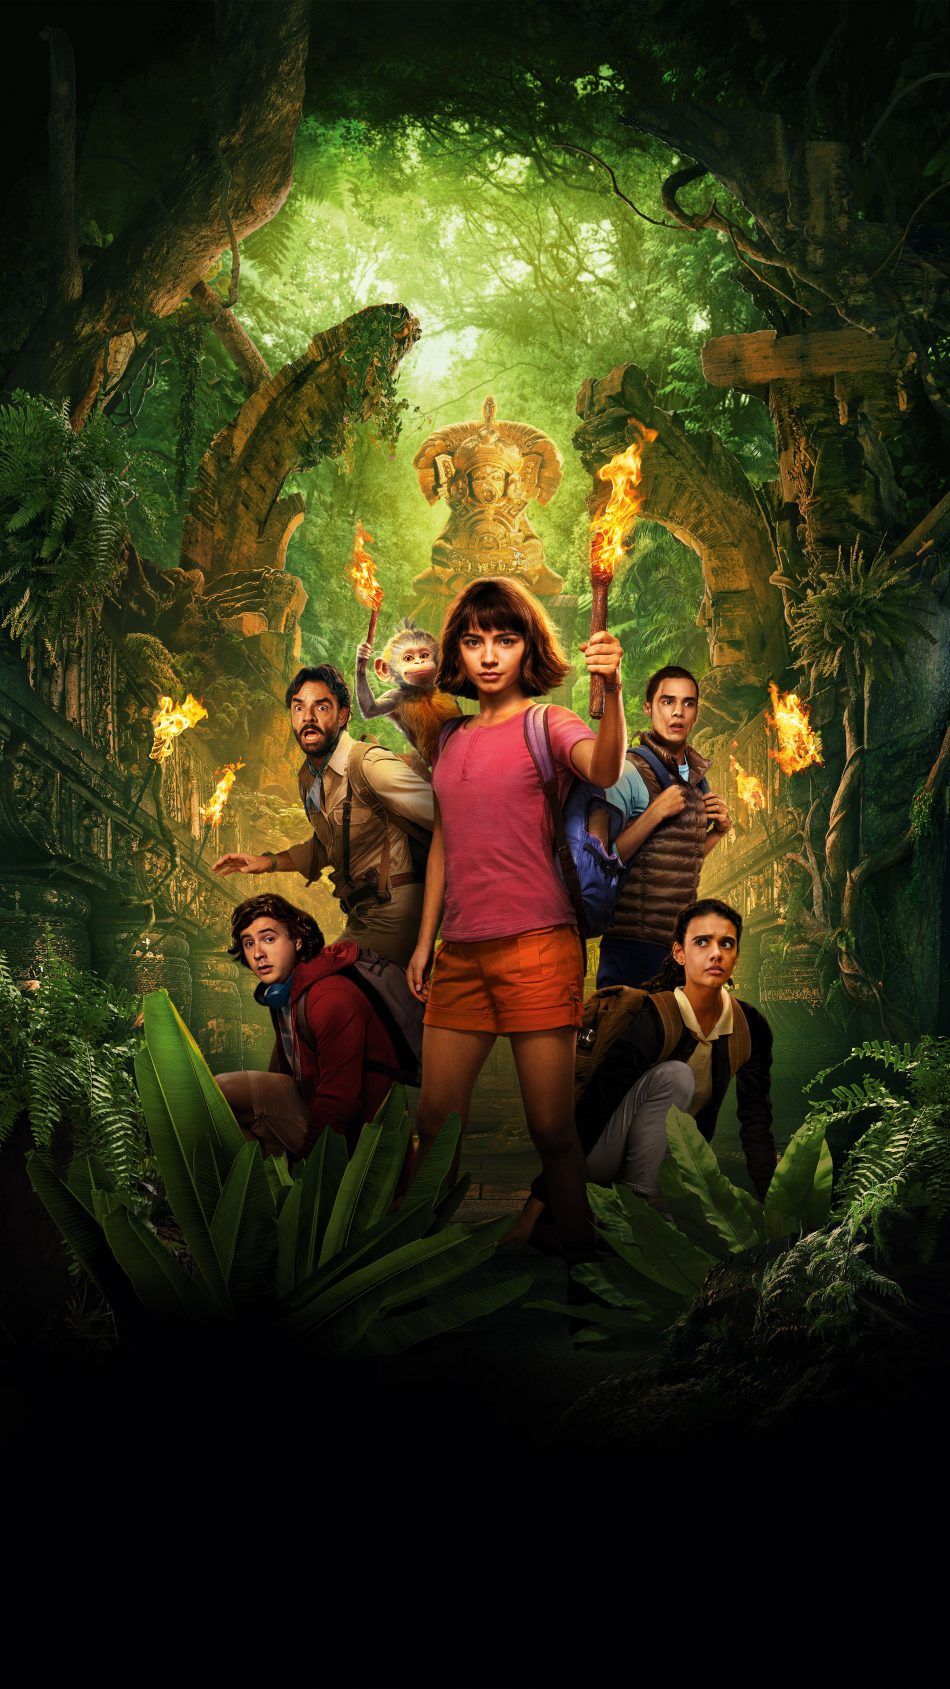 Dora And The Lost City of Gold 2019 Adventure 4K Ultra HD Mobile Wallpaper. Lost city of gold, Lost city, Gold movie poster